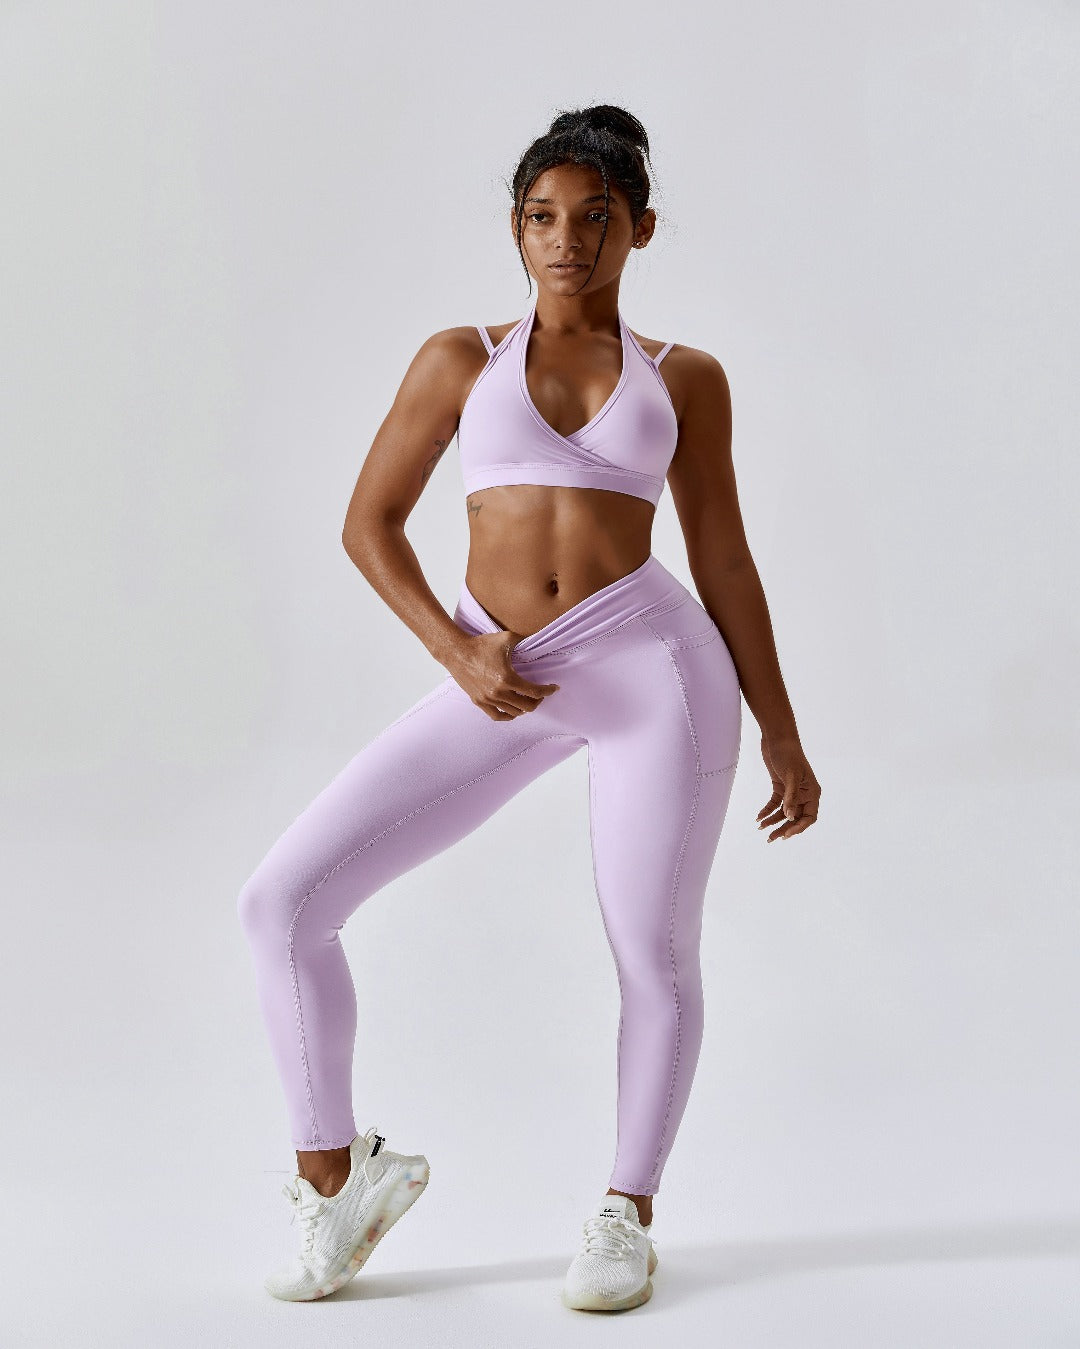 Buy KIWI RATA Women Scrunch Butt Leggings High Waisted Ruched Yoga Pants  Workout Butt Lifting Tights with Pockets,#2 Light Purple Ruched Butt(Sides  Pockets),Large at Amazon.in